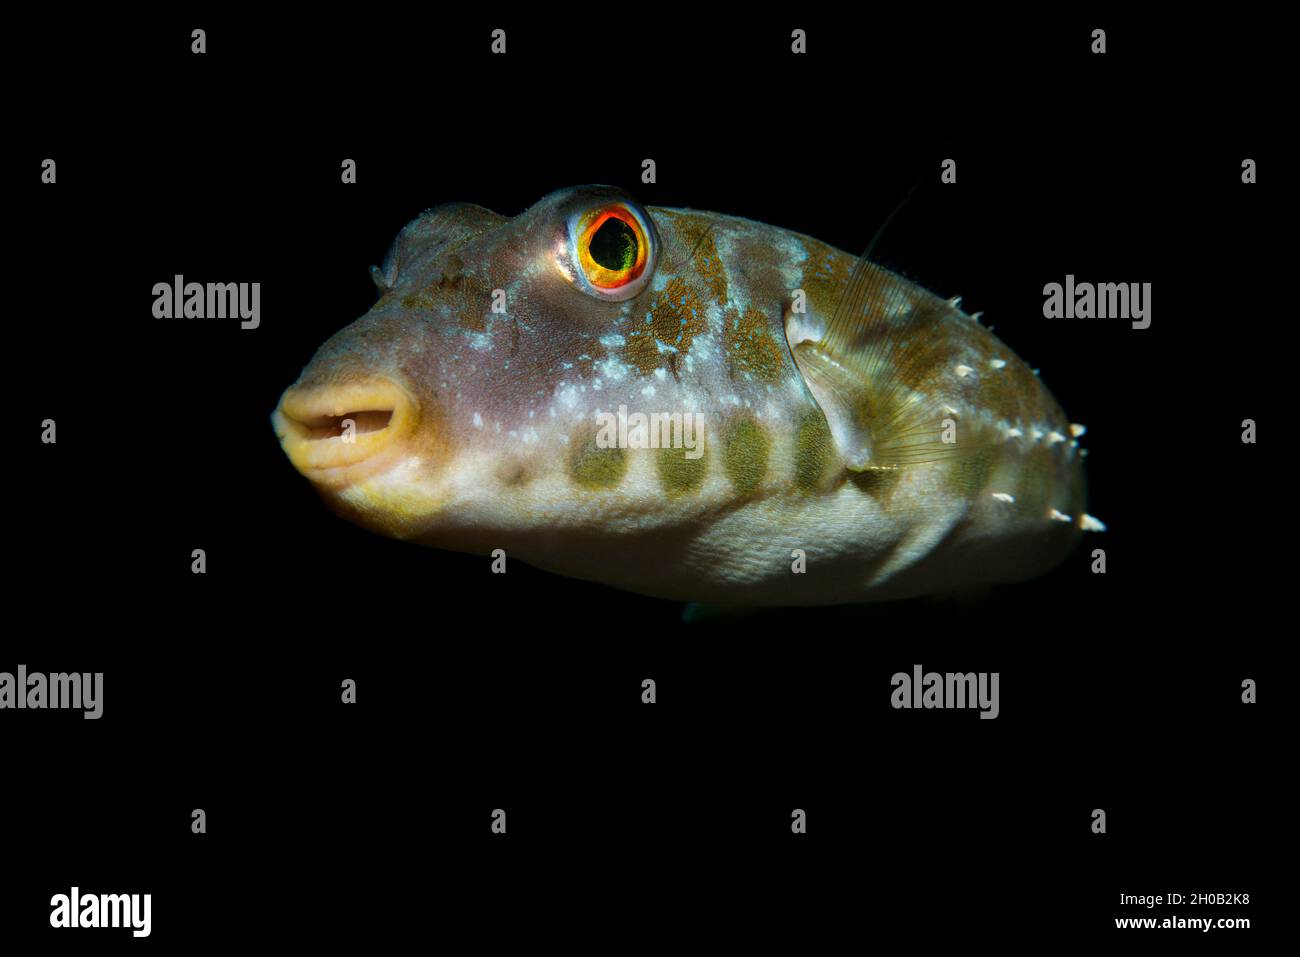 Bandtail puffer (Sphoeroides marmoratus). Fish of the Canary Islands, Tenerife. Stock Photo